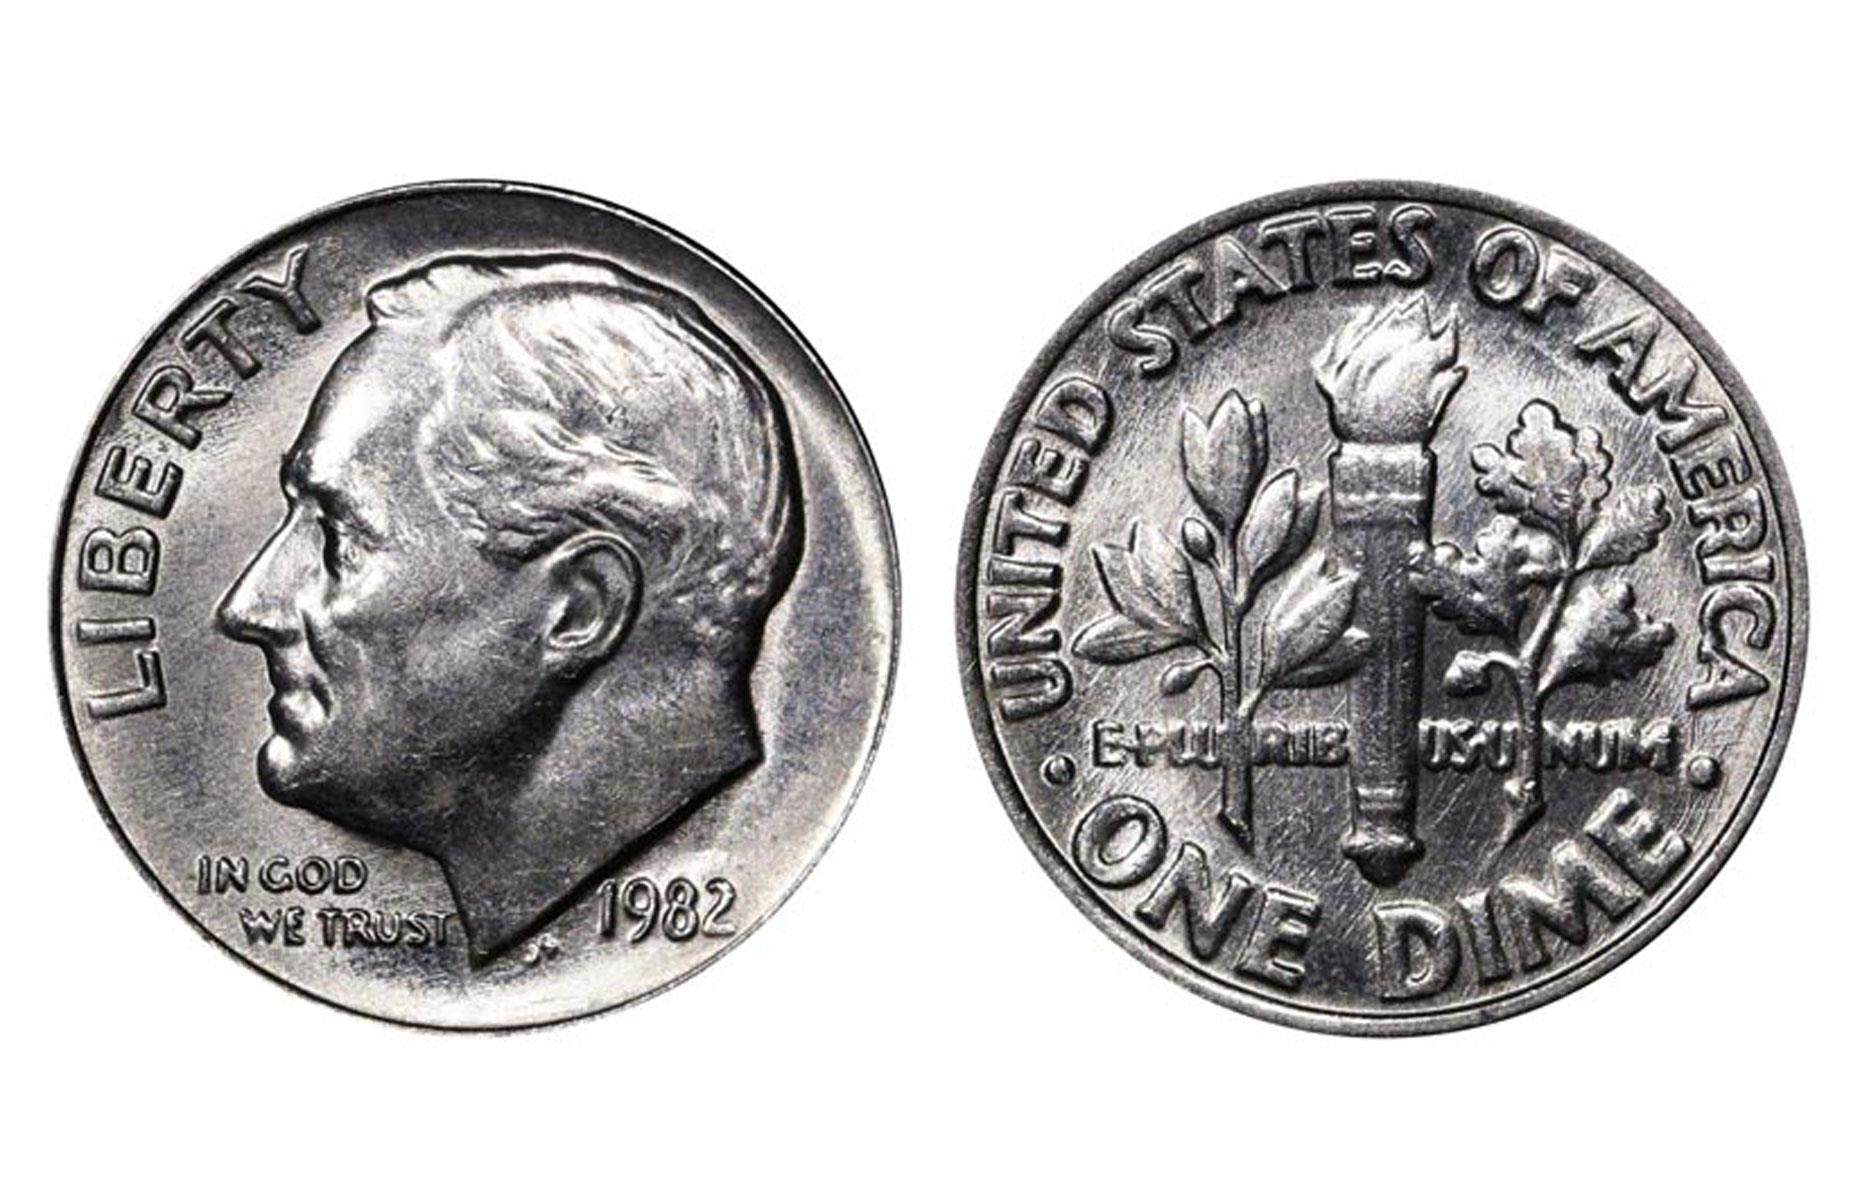 1982 Roosevelt no mint mark dime: up to $300